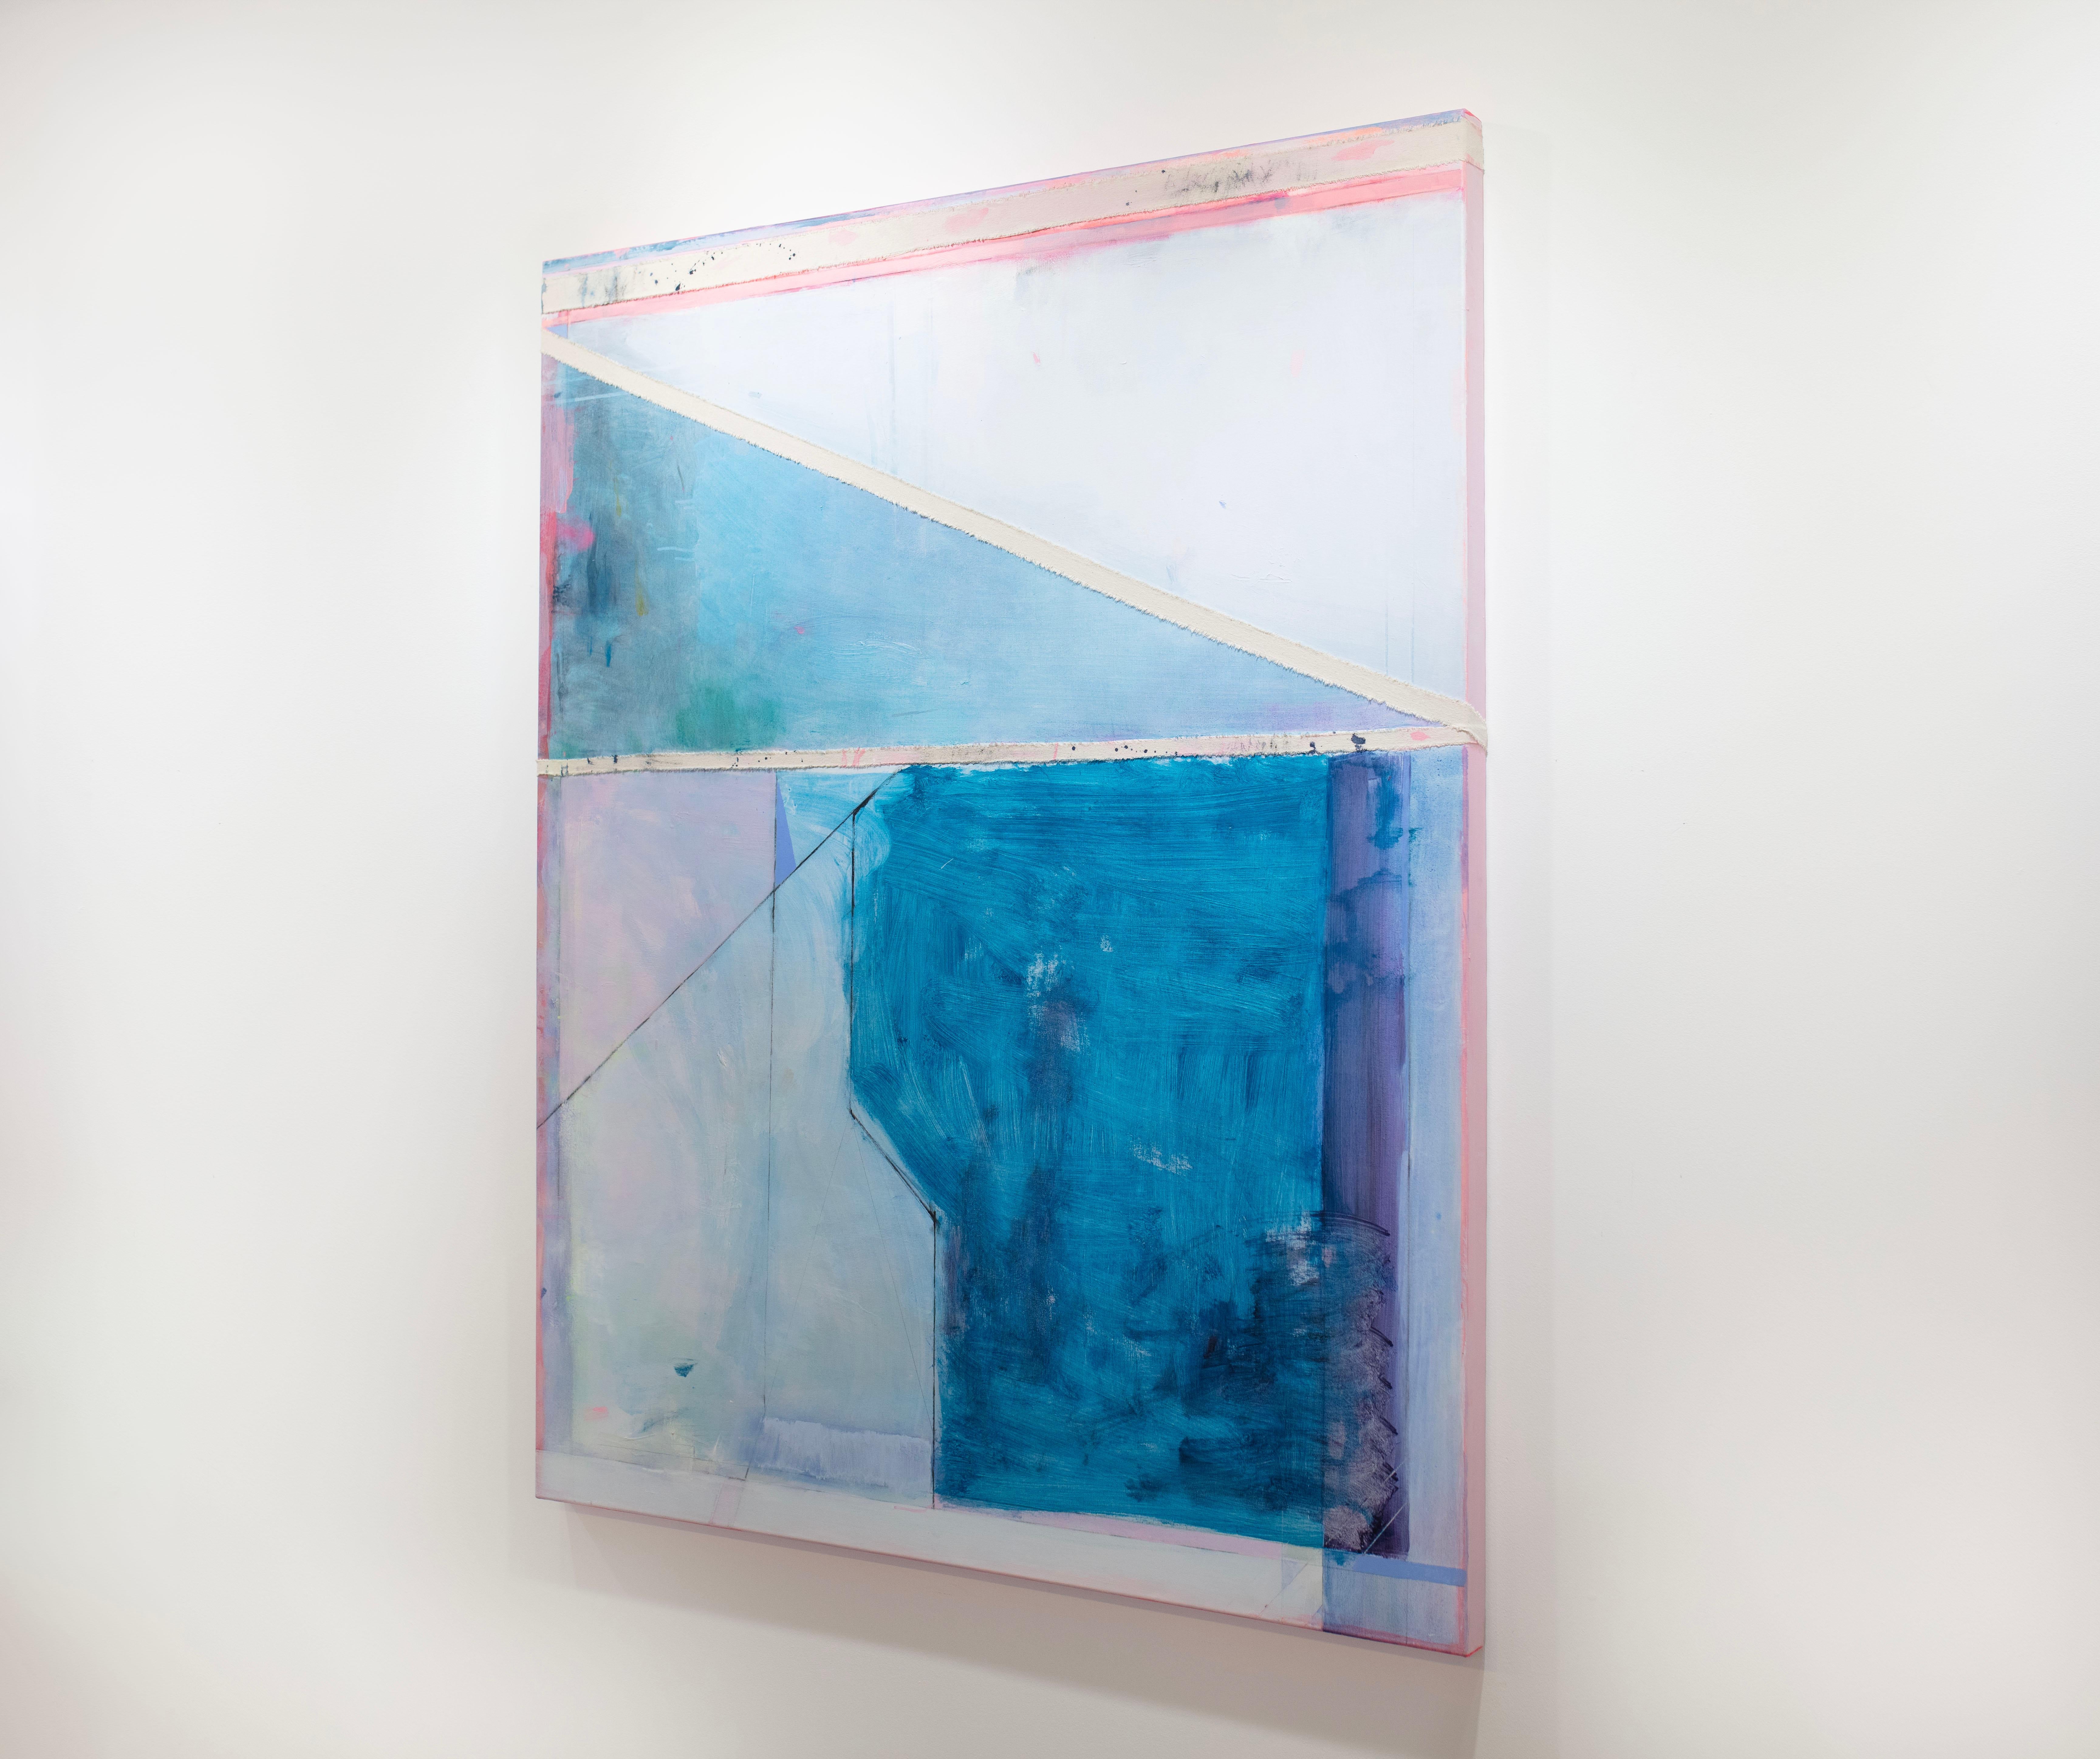 This large abstract statement painting by Kelly Rossetti is made with acrylic paint and raw canvas pieces assembled on gallery wrapped canvas. It features a light pink and deep blue palette with geometric horizontal and diagonal lines, shapes, and